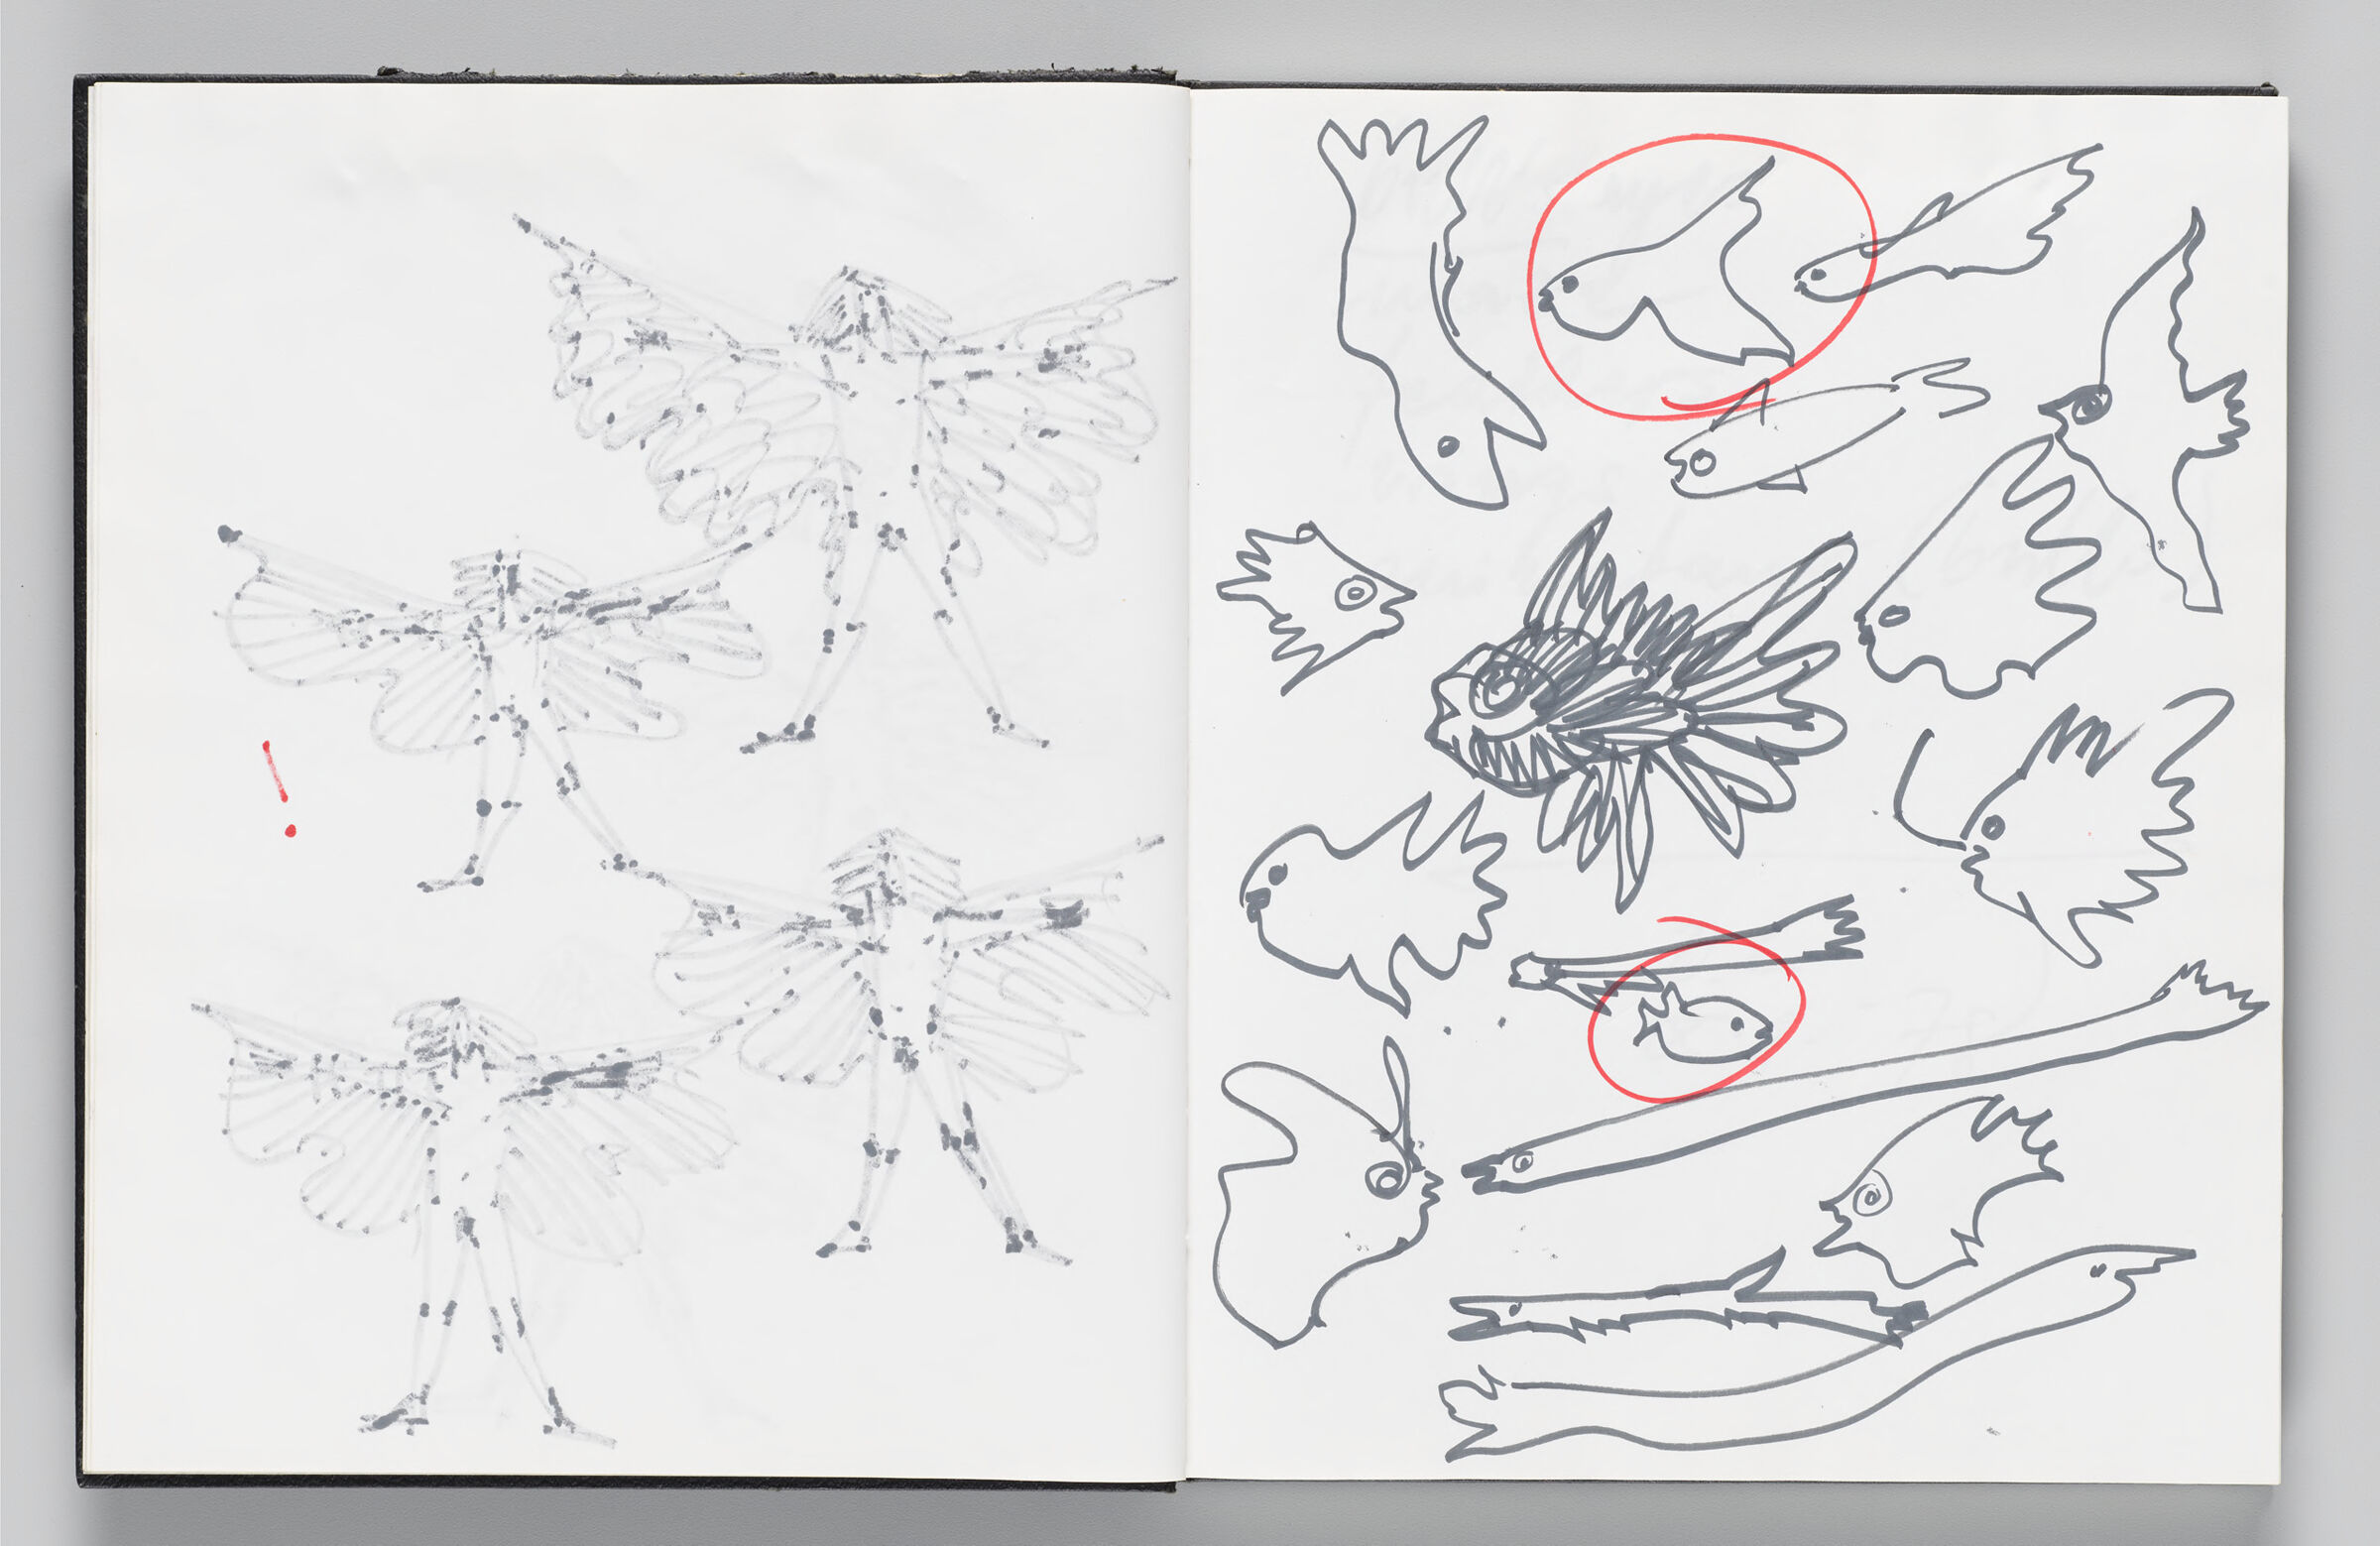 Untitled (Bleed-Through Of Previous Page, Left Page); Untitled (Sketches Of Fish, Right Page)